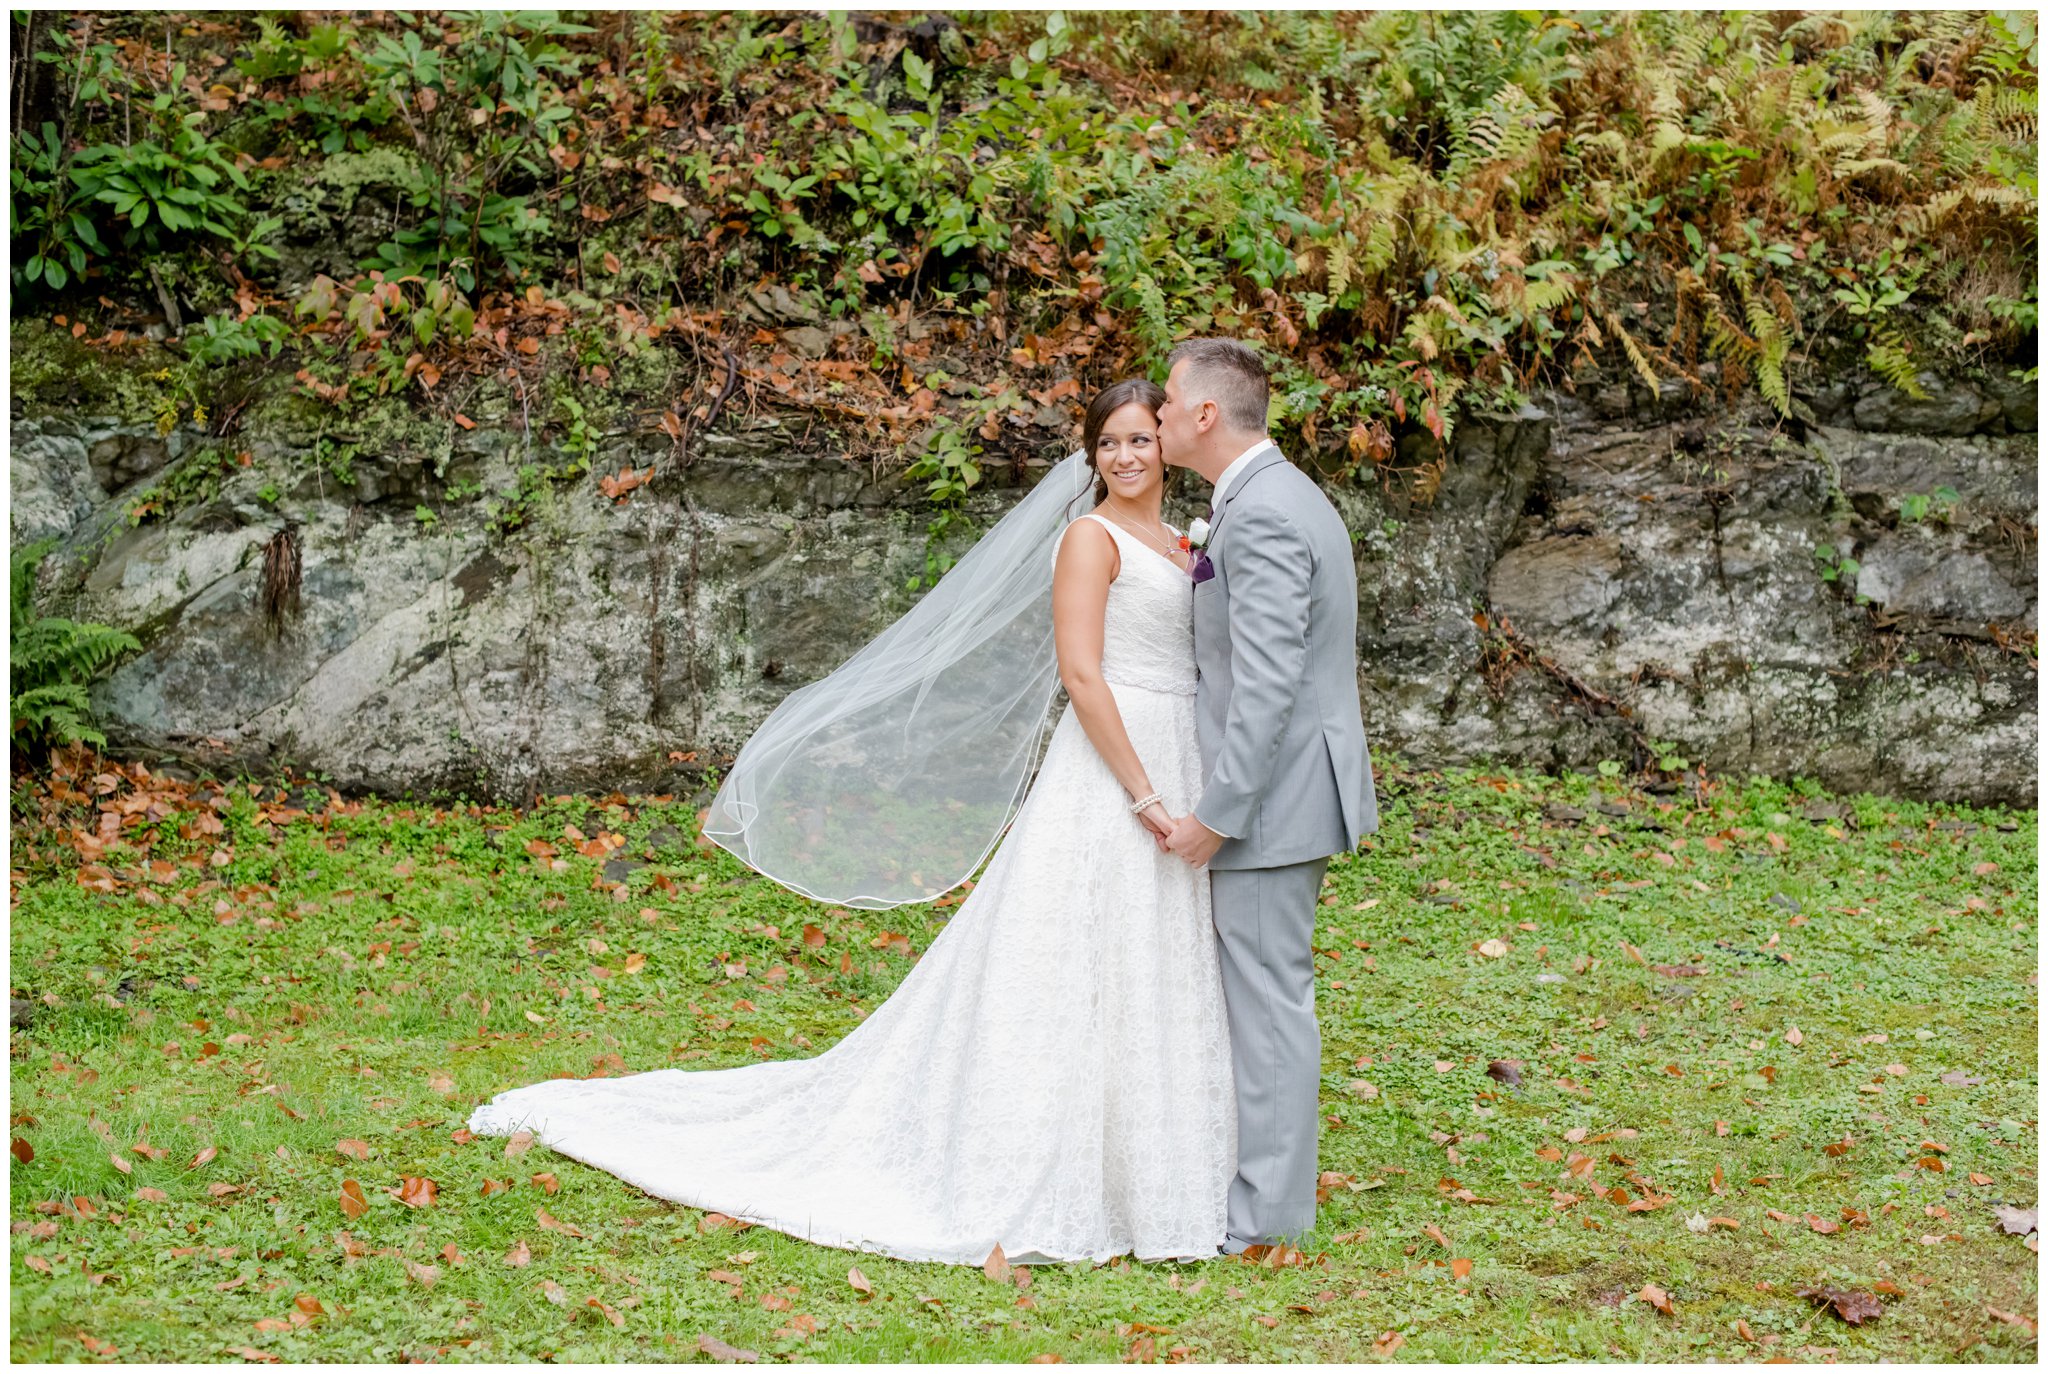 Laura Lee PhotographyDiana and Anthony | Stroudsmoor Country Inn Wedding | NJ, NY and ...2048 x 1374